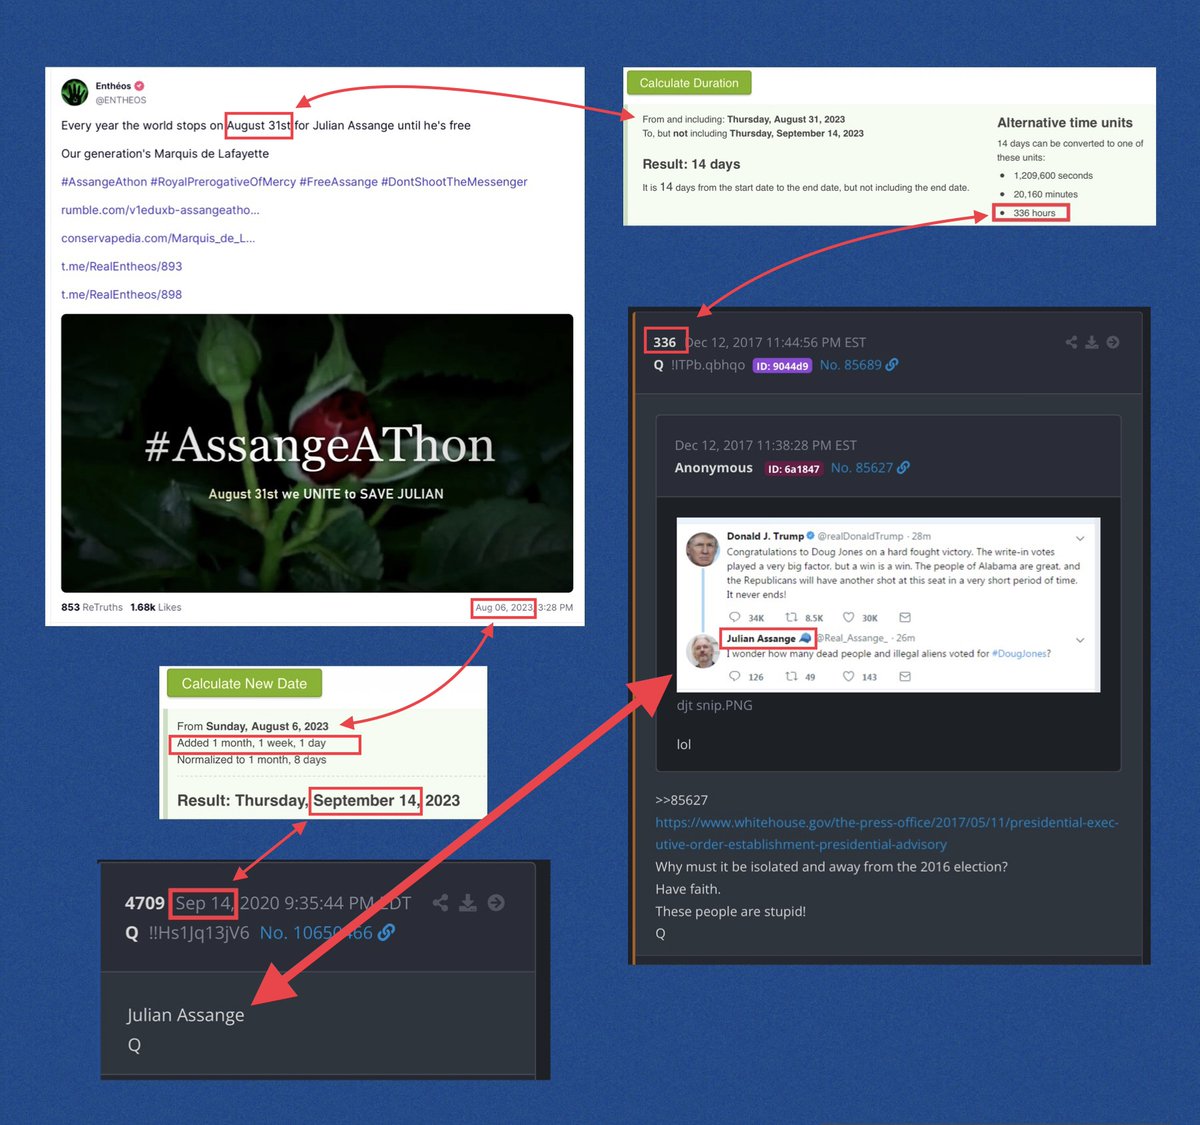 Does anyone else ‘see’ these connections?

On 8.6.23 @ENTHEOS posted #AssangeAThon on August 31st.

1 month, 1 week and 1 day (111) from 8.6.23 = Sep 14
Q drop dated Sep. 14 = Julian Assange
The delta from August 31 to Sep 14 = 336 hours
Q336 includes a tweet from Julian Assange